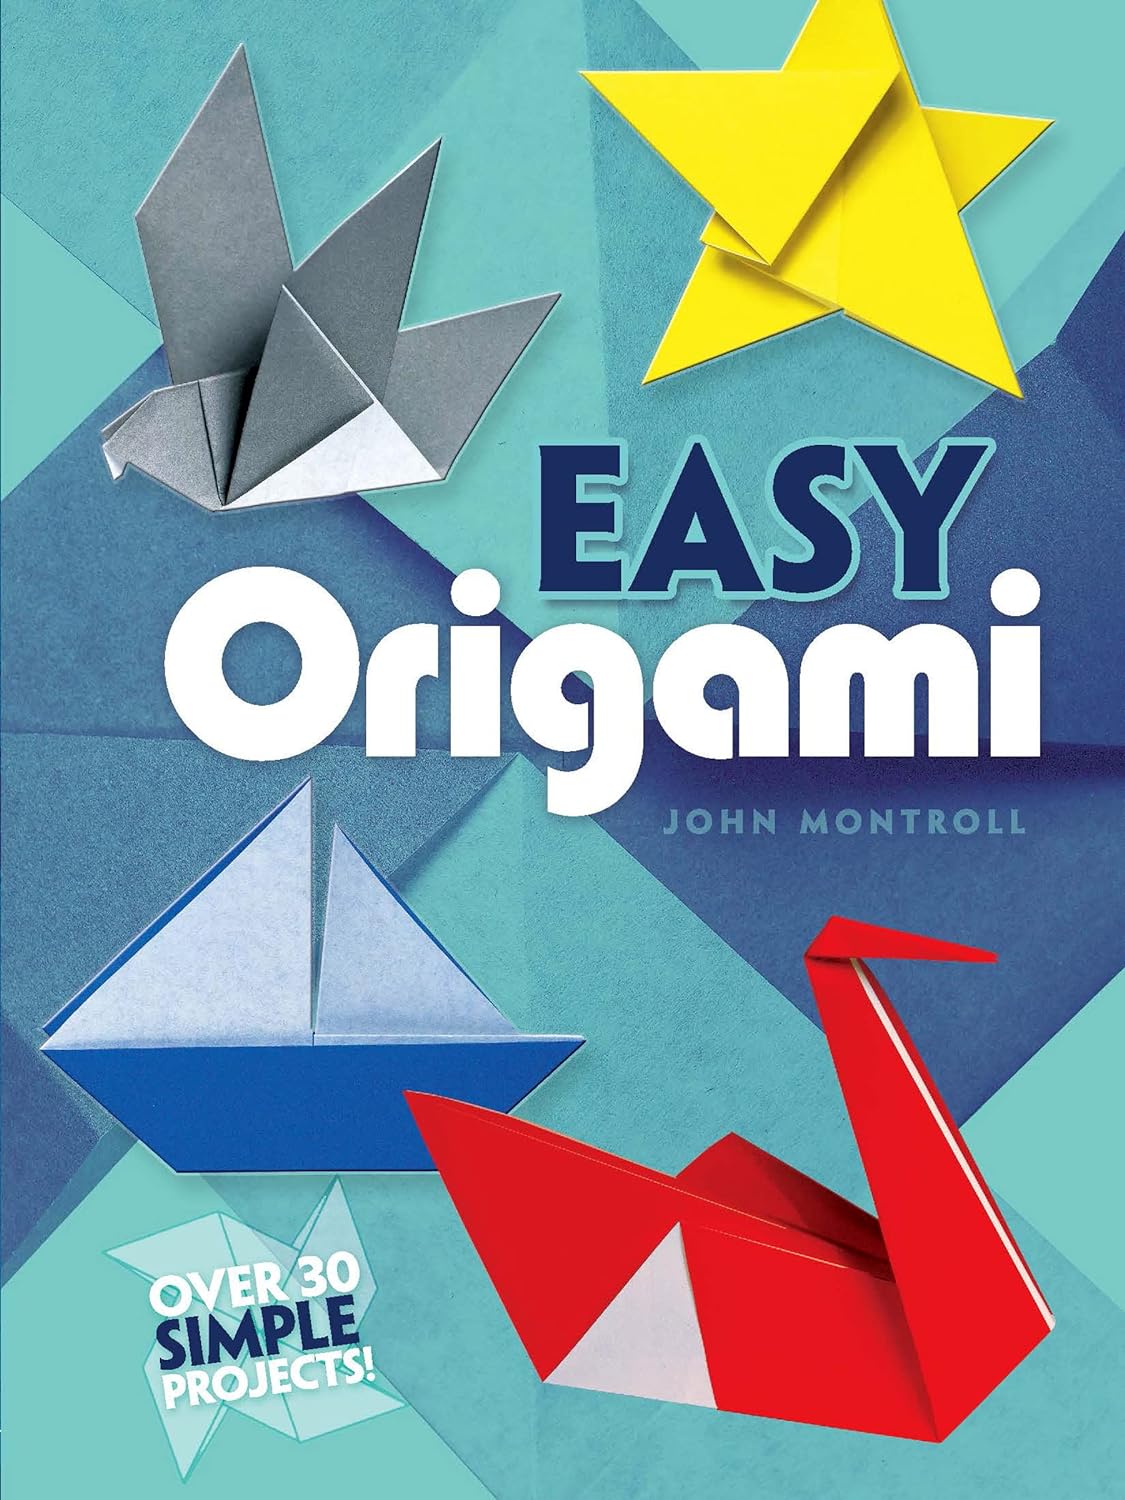 Livre ISBN 0486272982 Easy Origami : Over 30 simple projects (John Montroll)